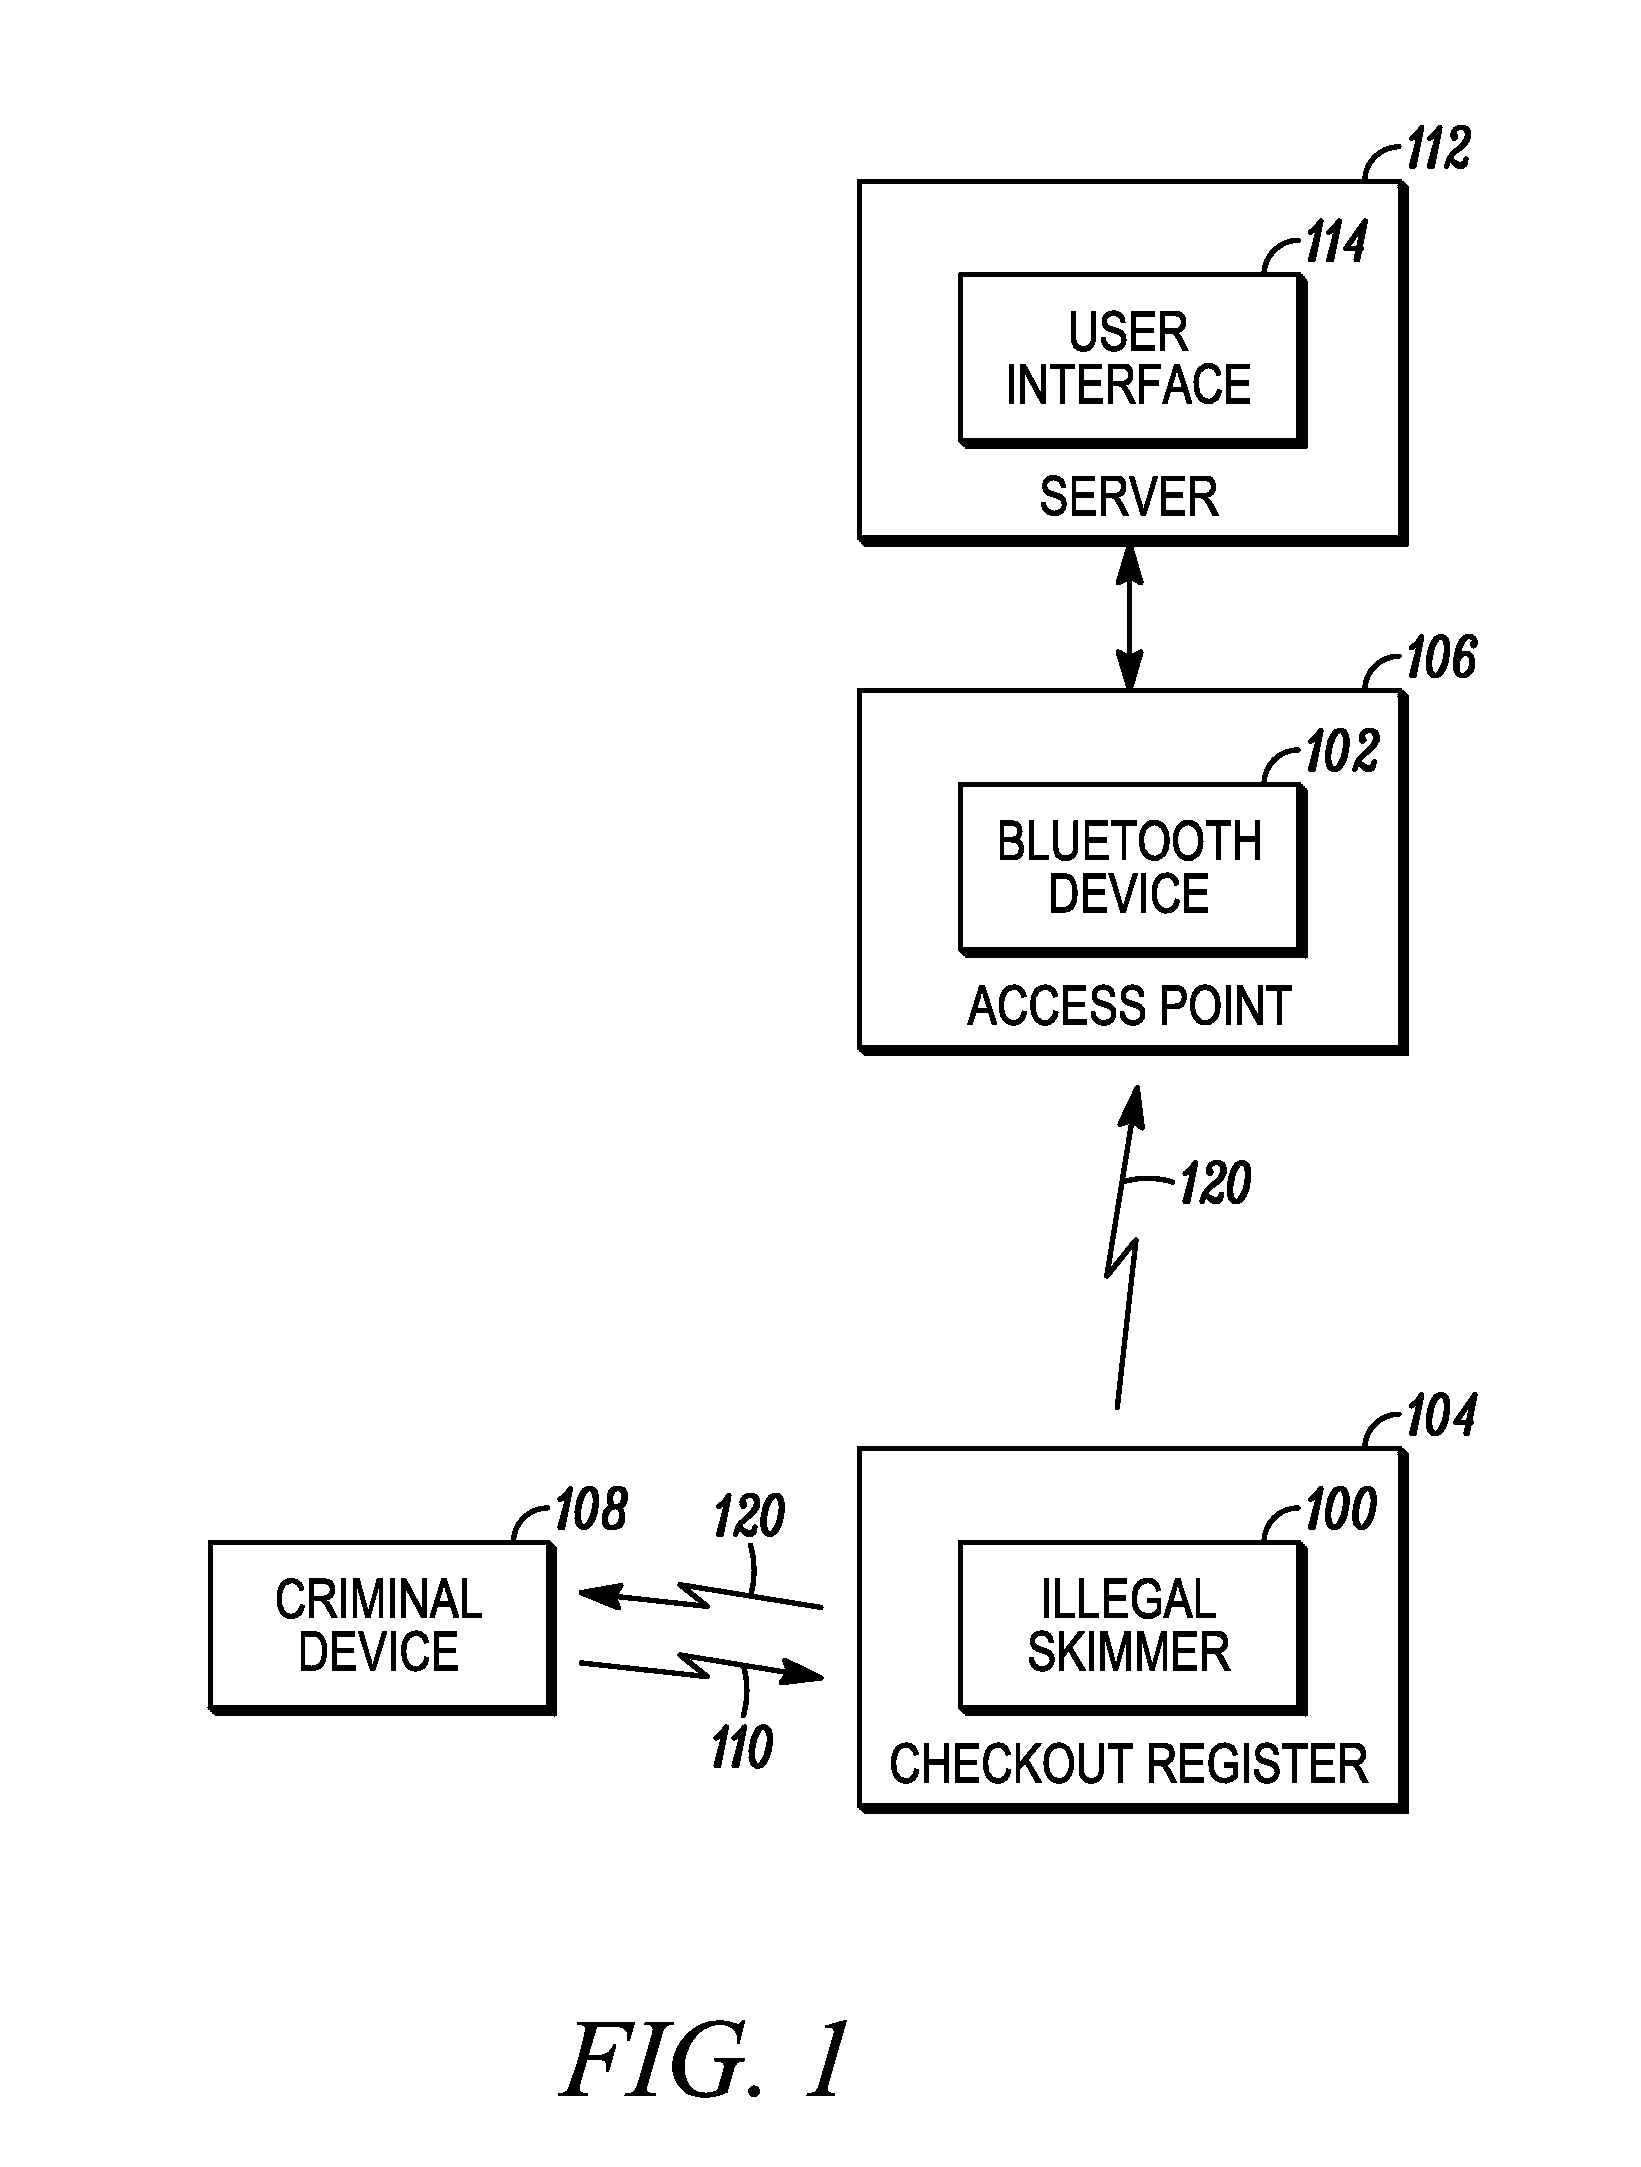 Detection of an unauthorized wireless communication device